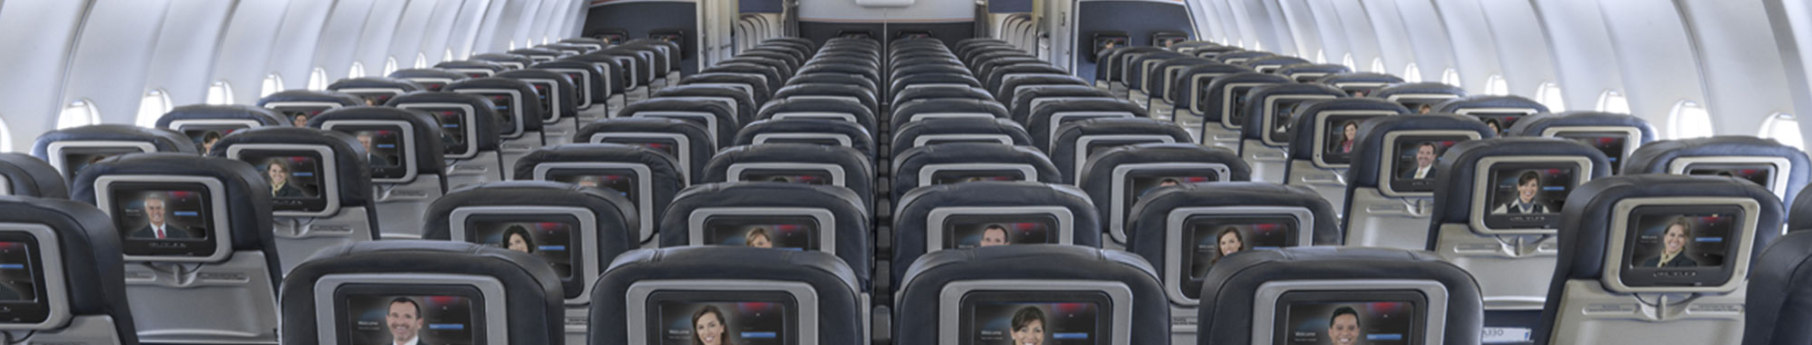 Inside an American Airline Plane